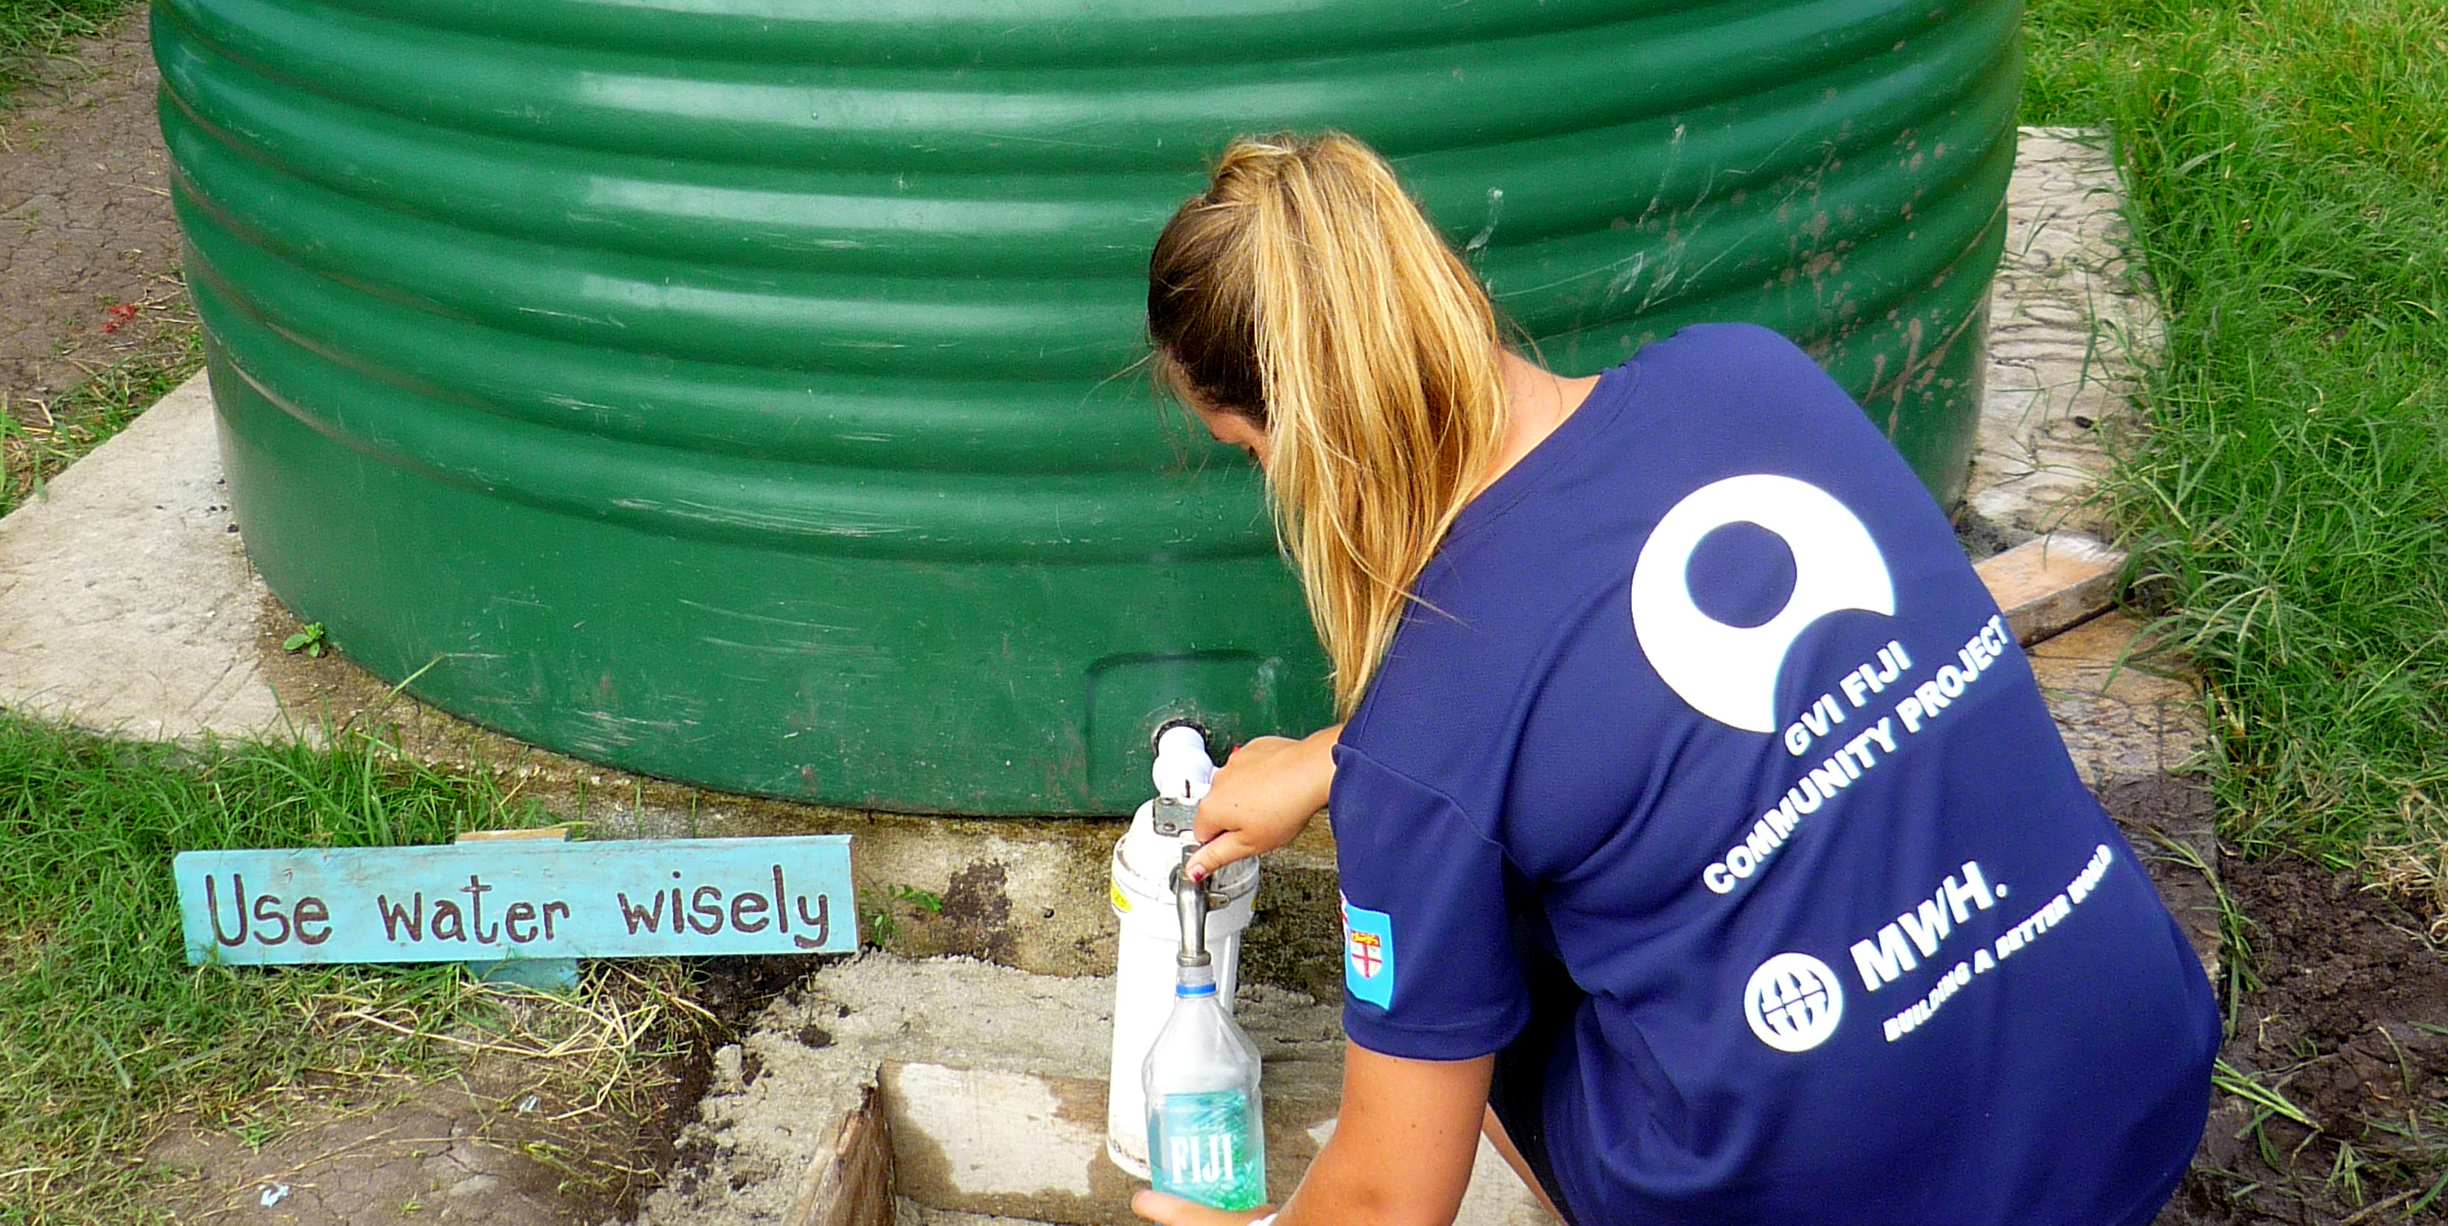 A participant collects water from a rainwater collection point in Dawasamu, Fiji as part of their community development internship.